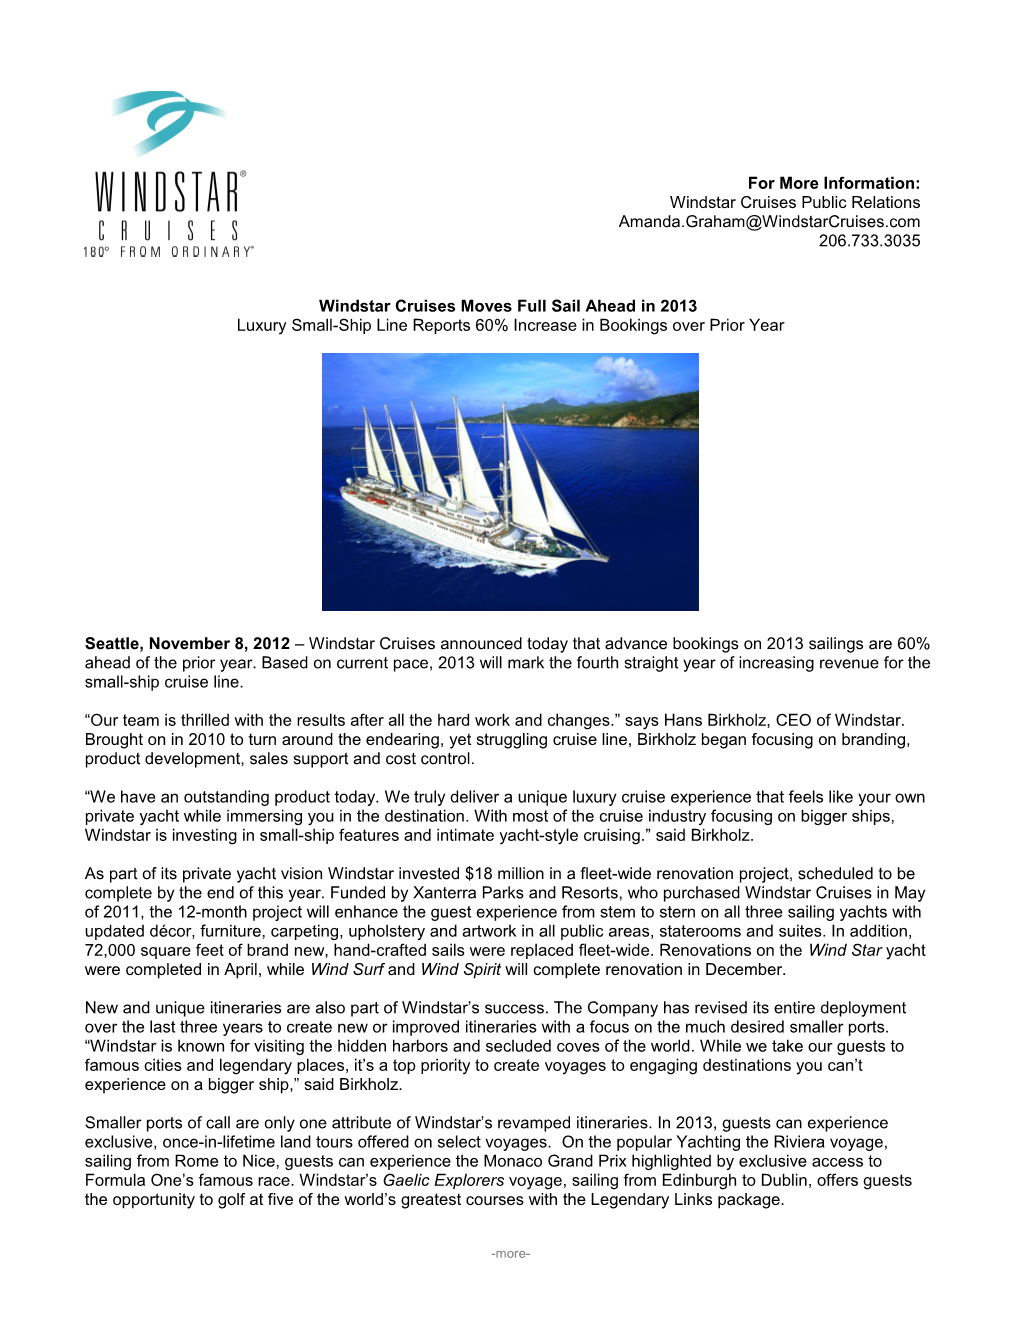 Windstar Cruises Moves Full Sail Ahead in 2013